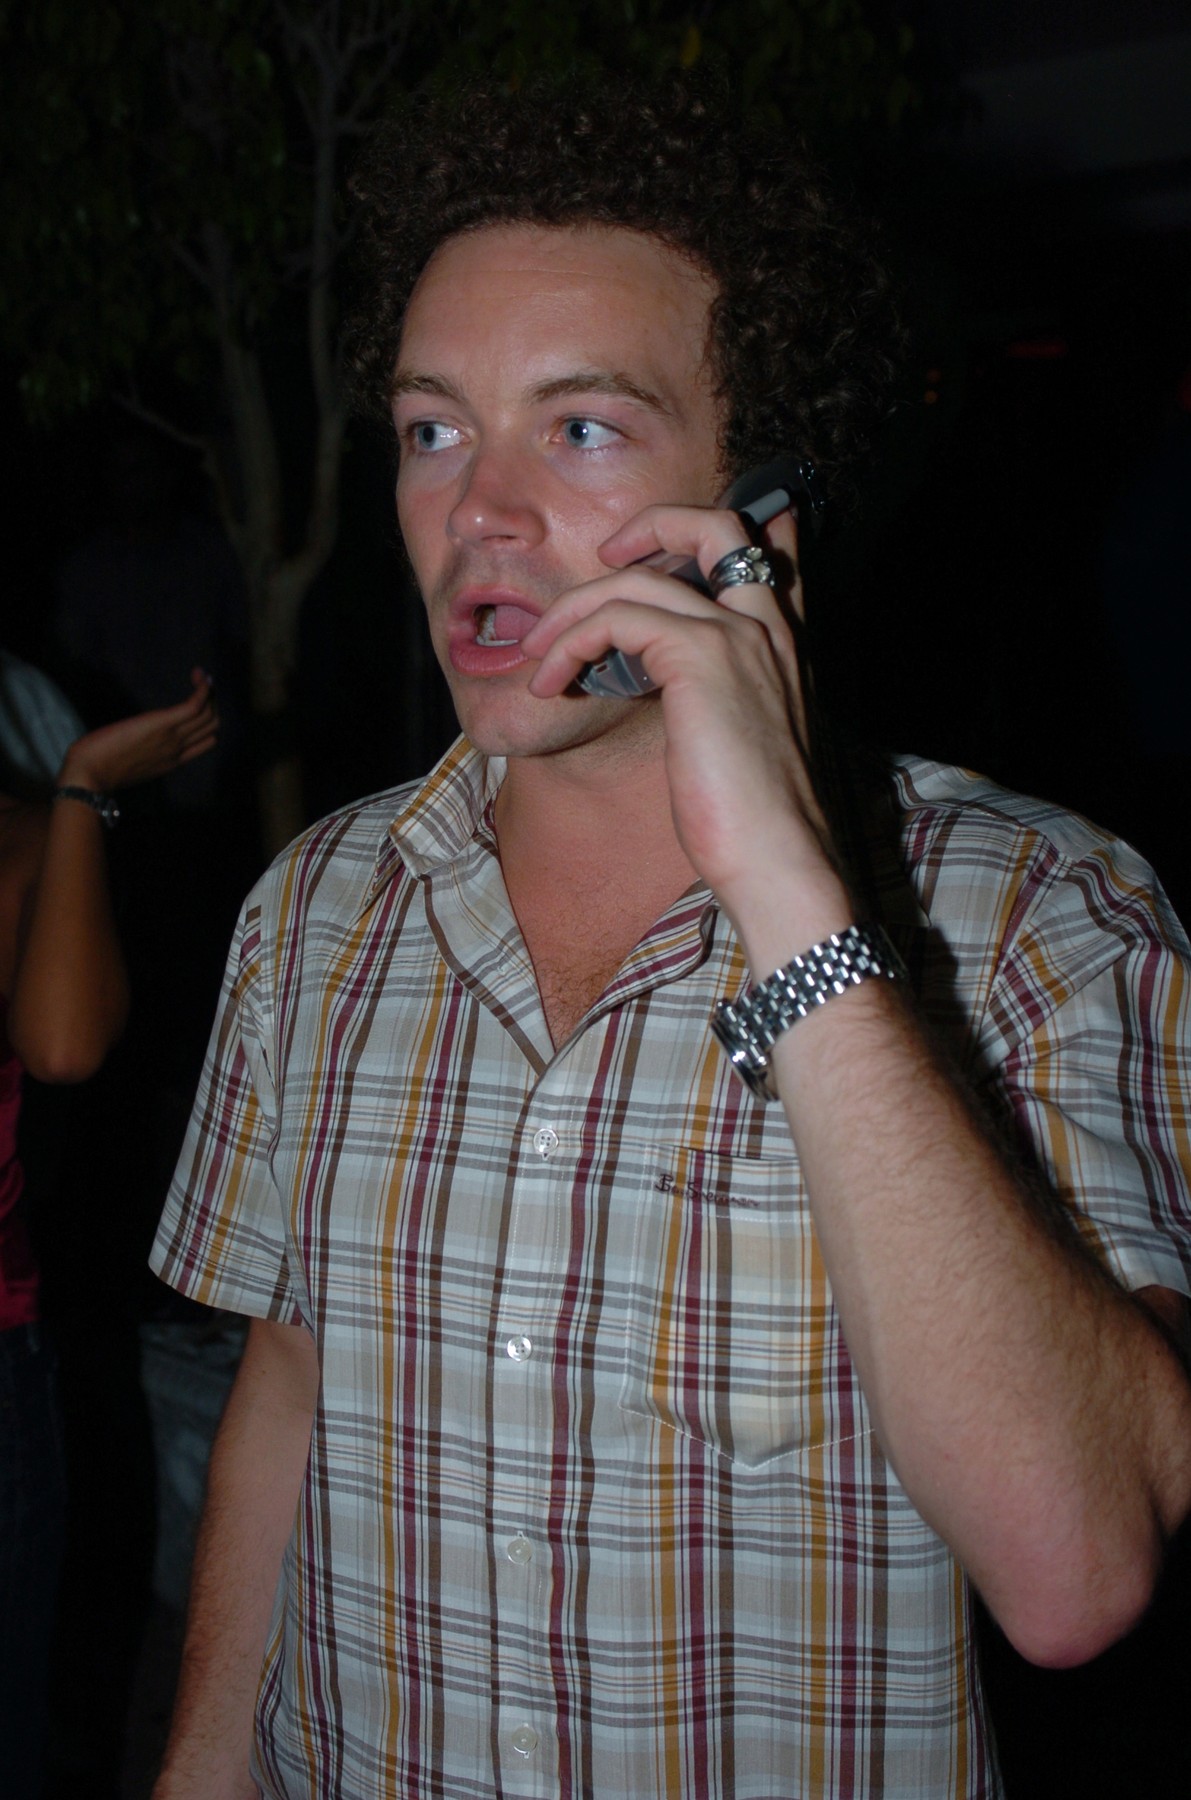 July 22, 2004, Miami Beach, Florida, United States Of America: Miami Beach 2004: FILE PHOTO - Danny Masterson at *NSYNC's Challenge for the Children VI at The Roney Palace Resort 2004 in Miami Beach, Florida ..People:  Danny Masterson.,Image: 532825458, License: Rights-managed, Restrictions: * New York City Newspapers Rights OUT *, Model Release: no, Credit line: SMG / Zuma Press / Profimedia